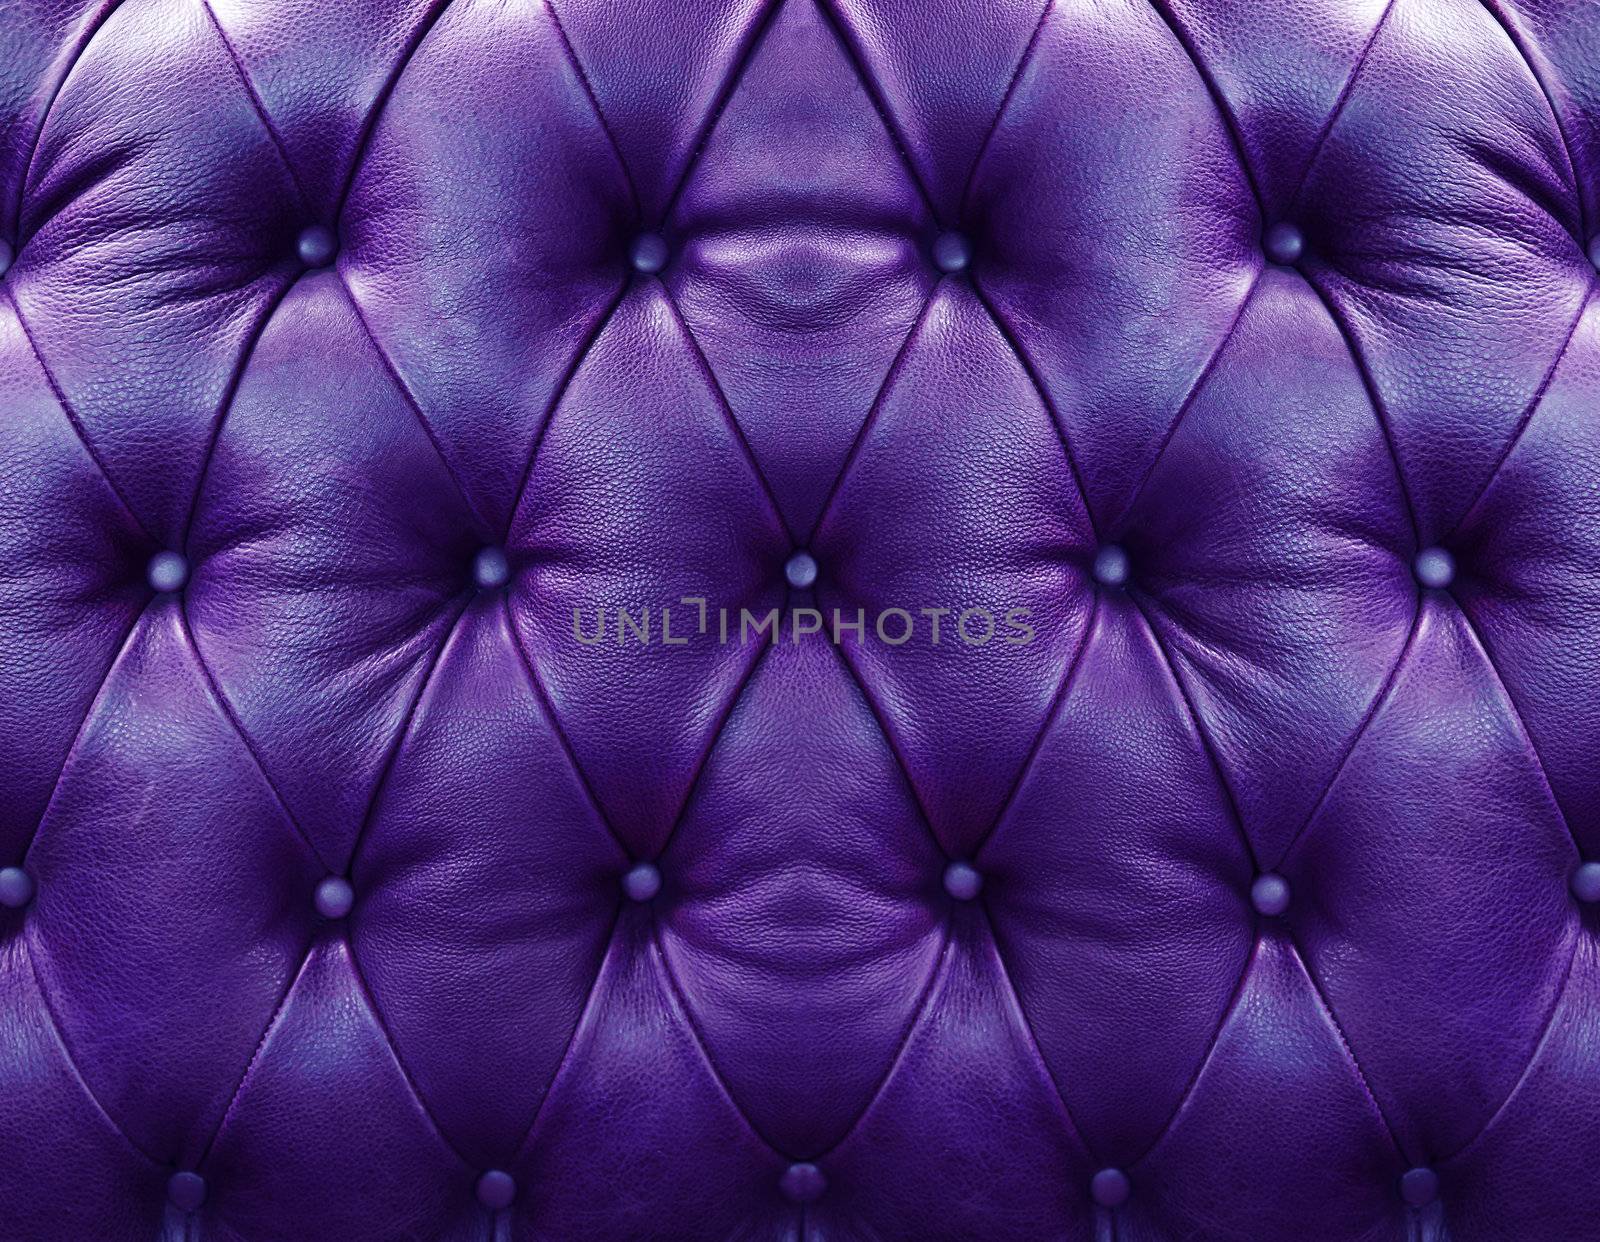 Violet upholstery leather  by stoonn